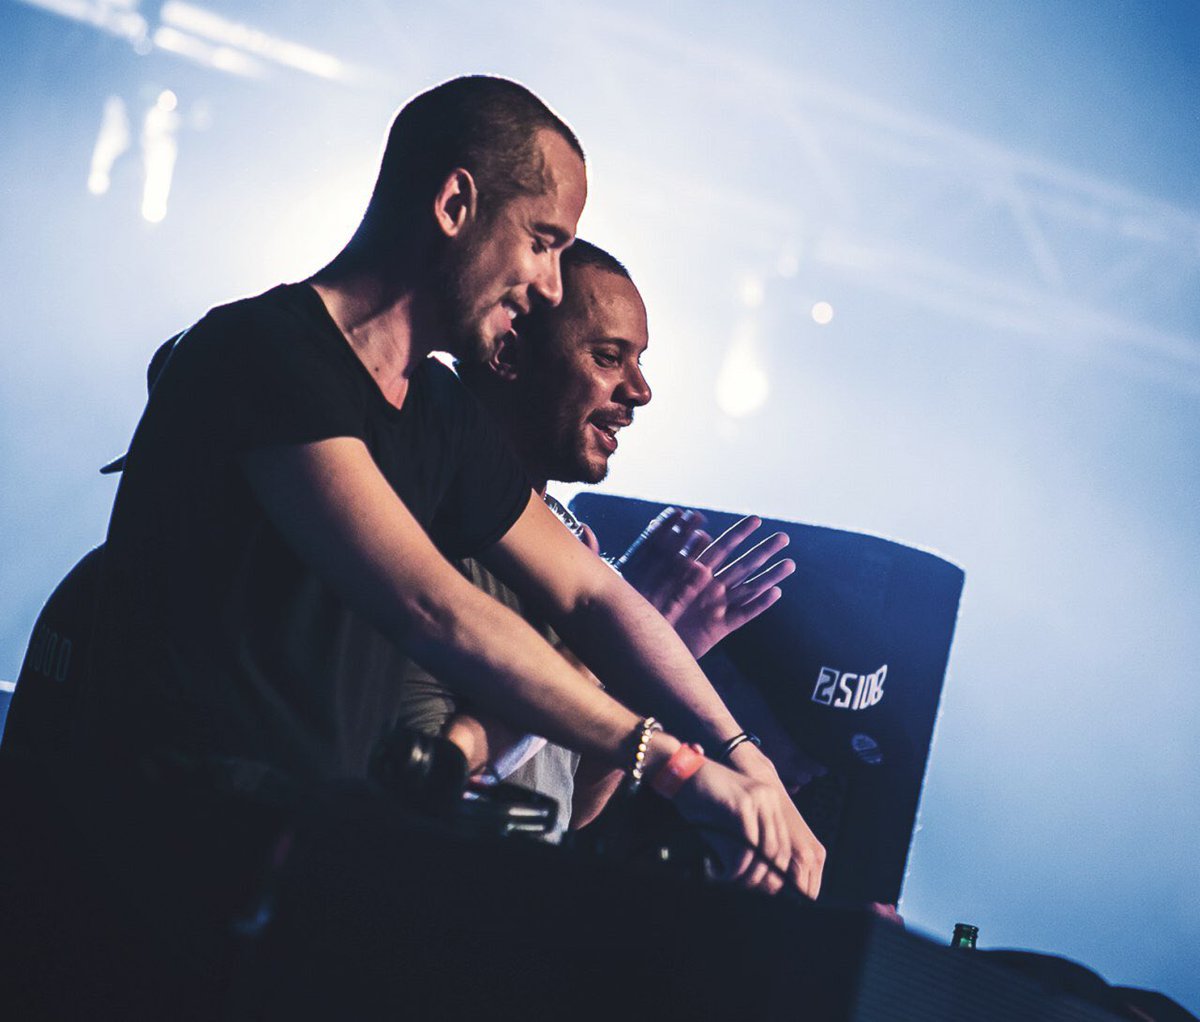 Was lots of fun last night together with @Noisecontroller #vwab https://t.co/4CgxtnKMNQ